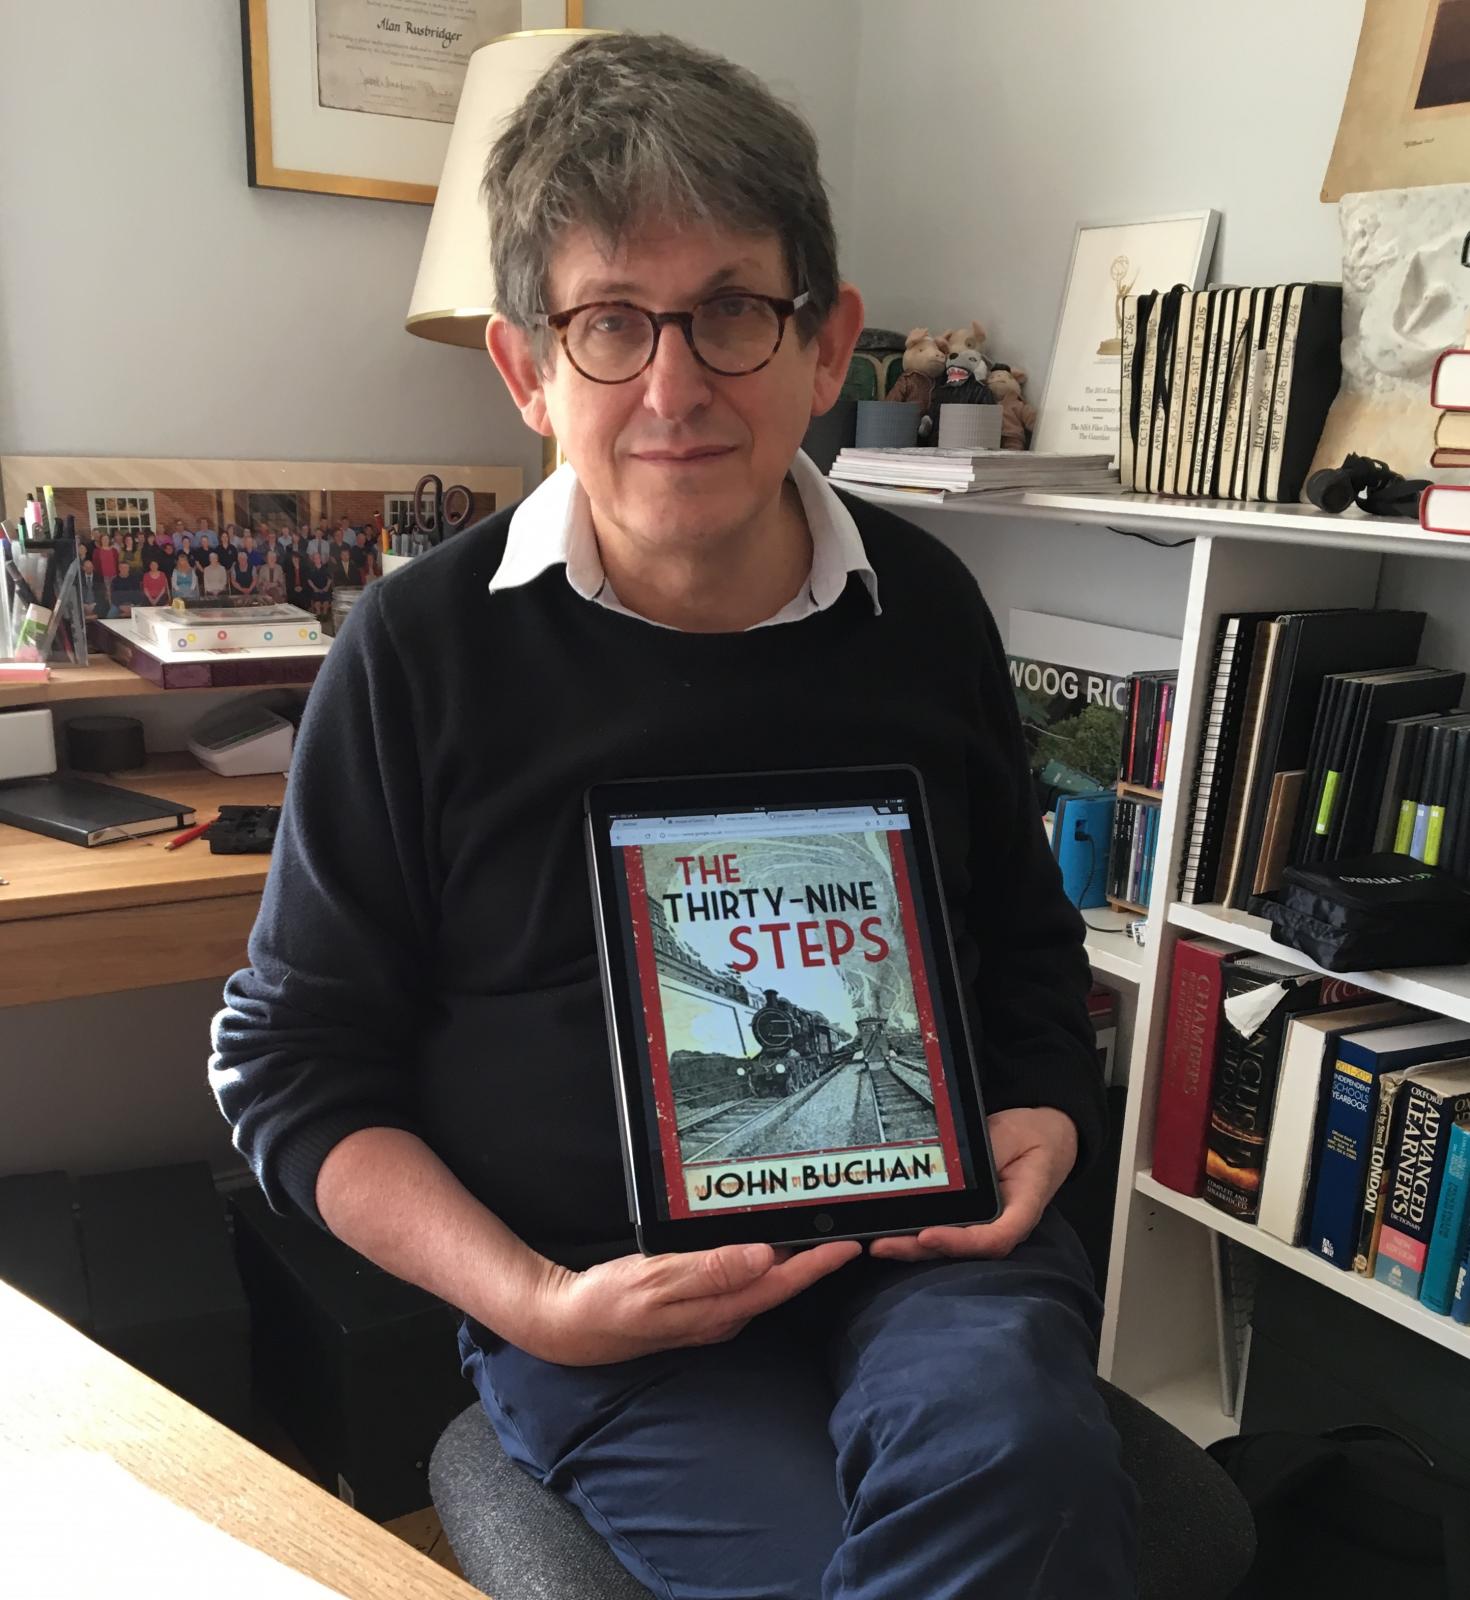 Our Principal, Alan Rusbridger, with his recommendation for World Book Day 2017